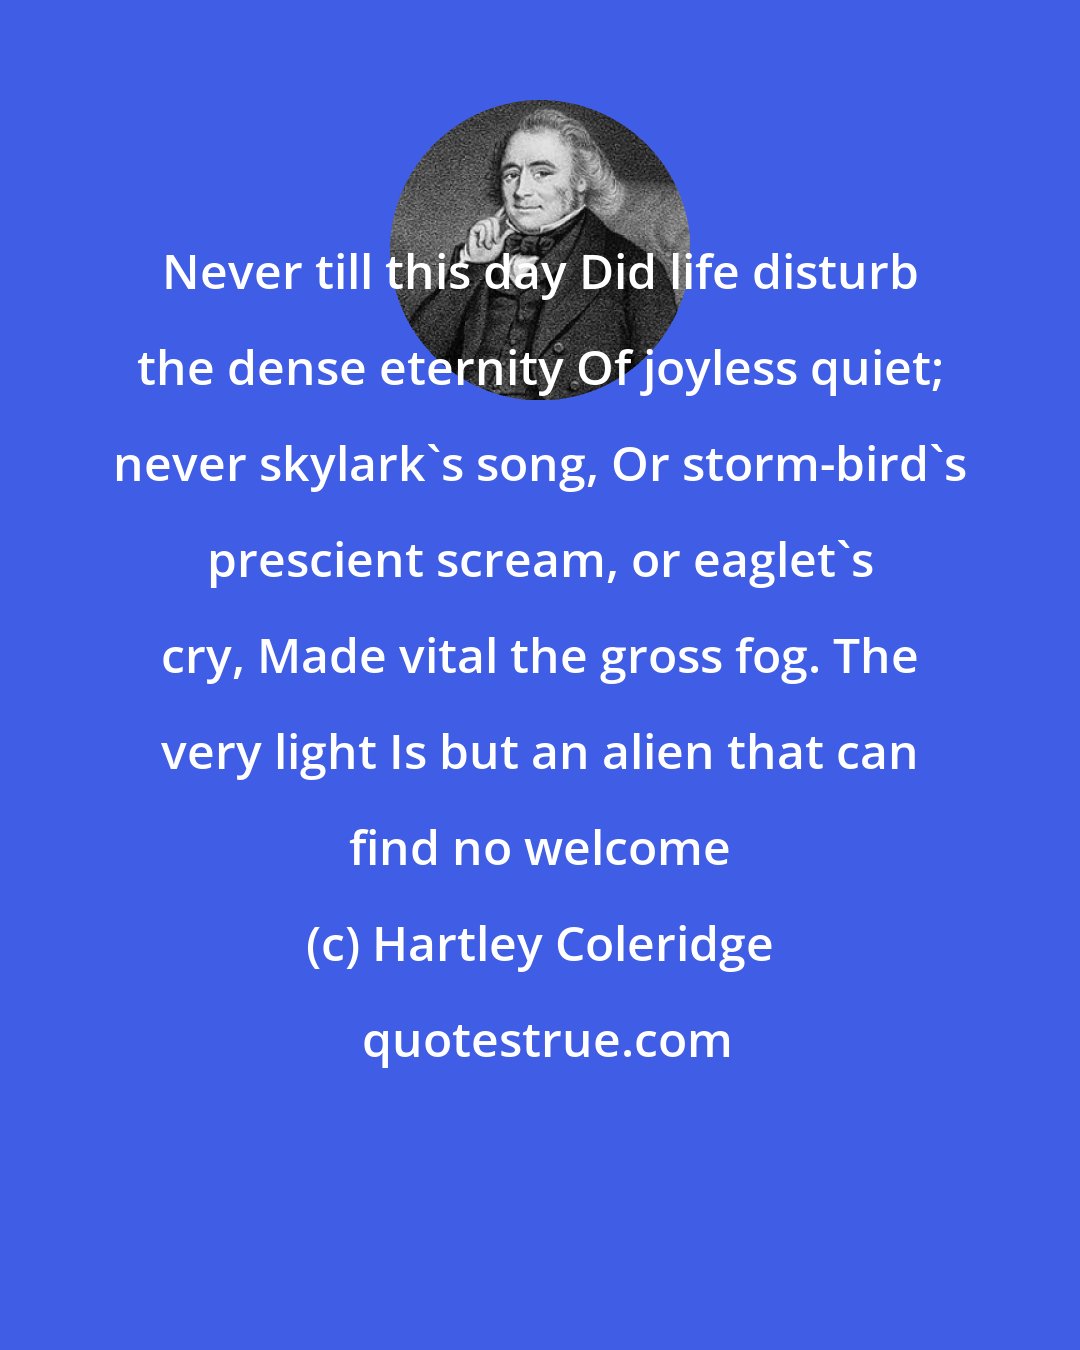 Hartley Coleridge: Never till this day Did life disturb the dense eternity Of joyless quiet; never skylark's song, Or storm-bird's prescient scream, or eaglet's cry, Made vital the gross fog. The very light Is but an alien that can find no welcome